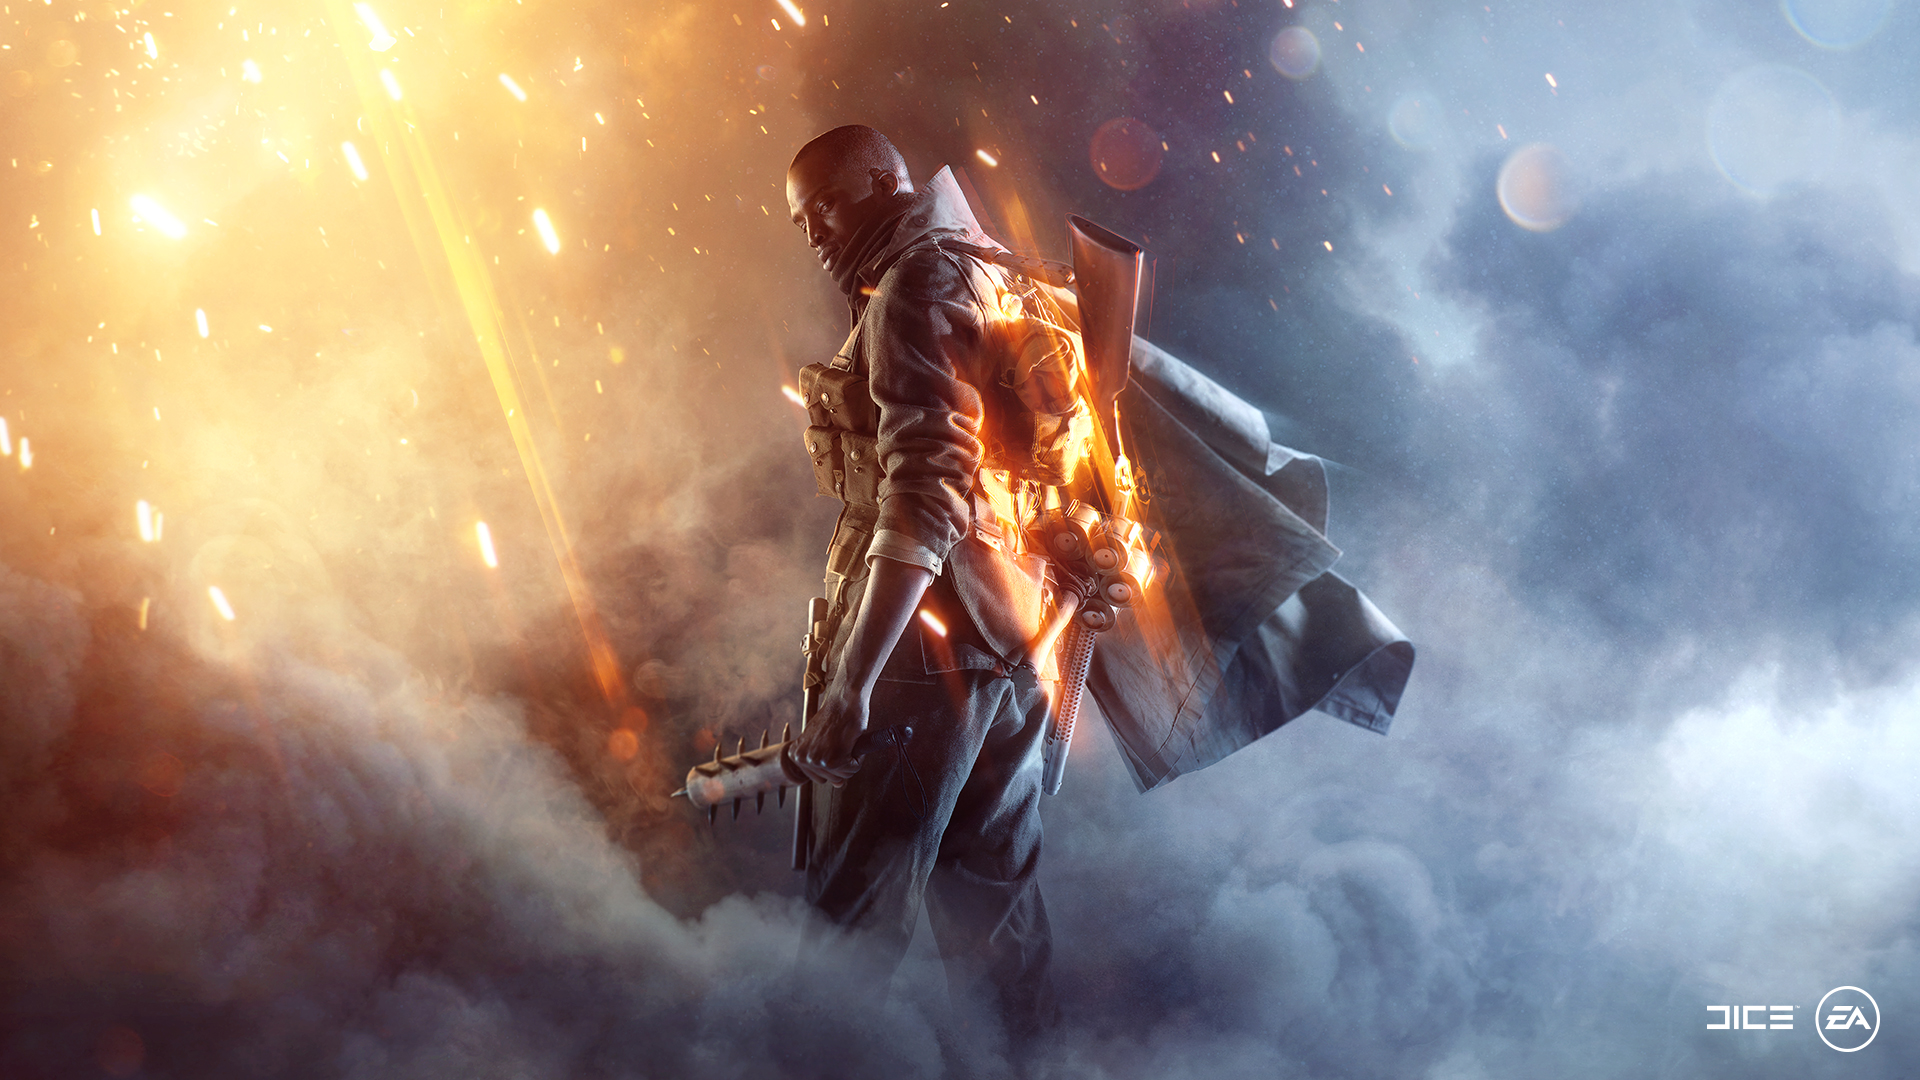 Battlefield 1 Wallpapers for PC, Mobile, and Tablets